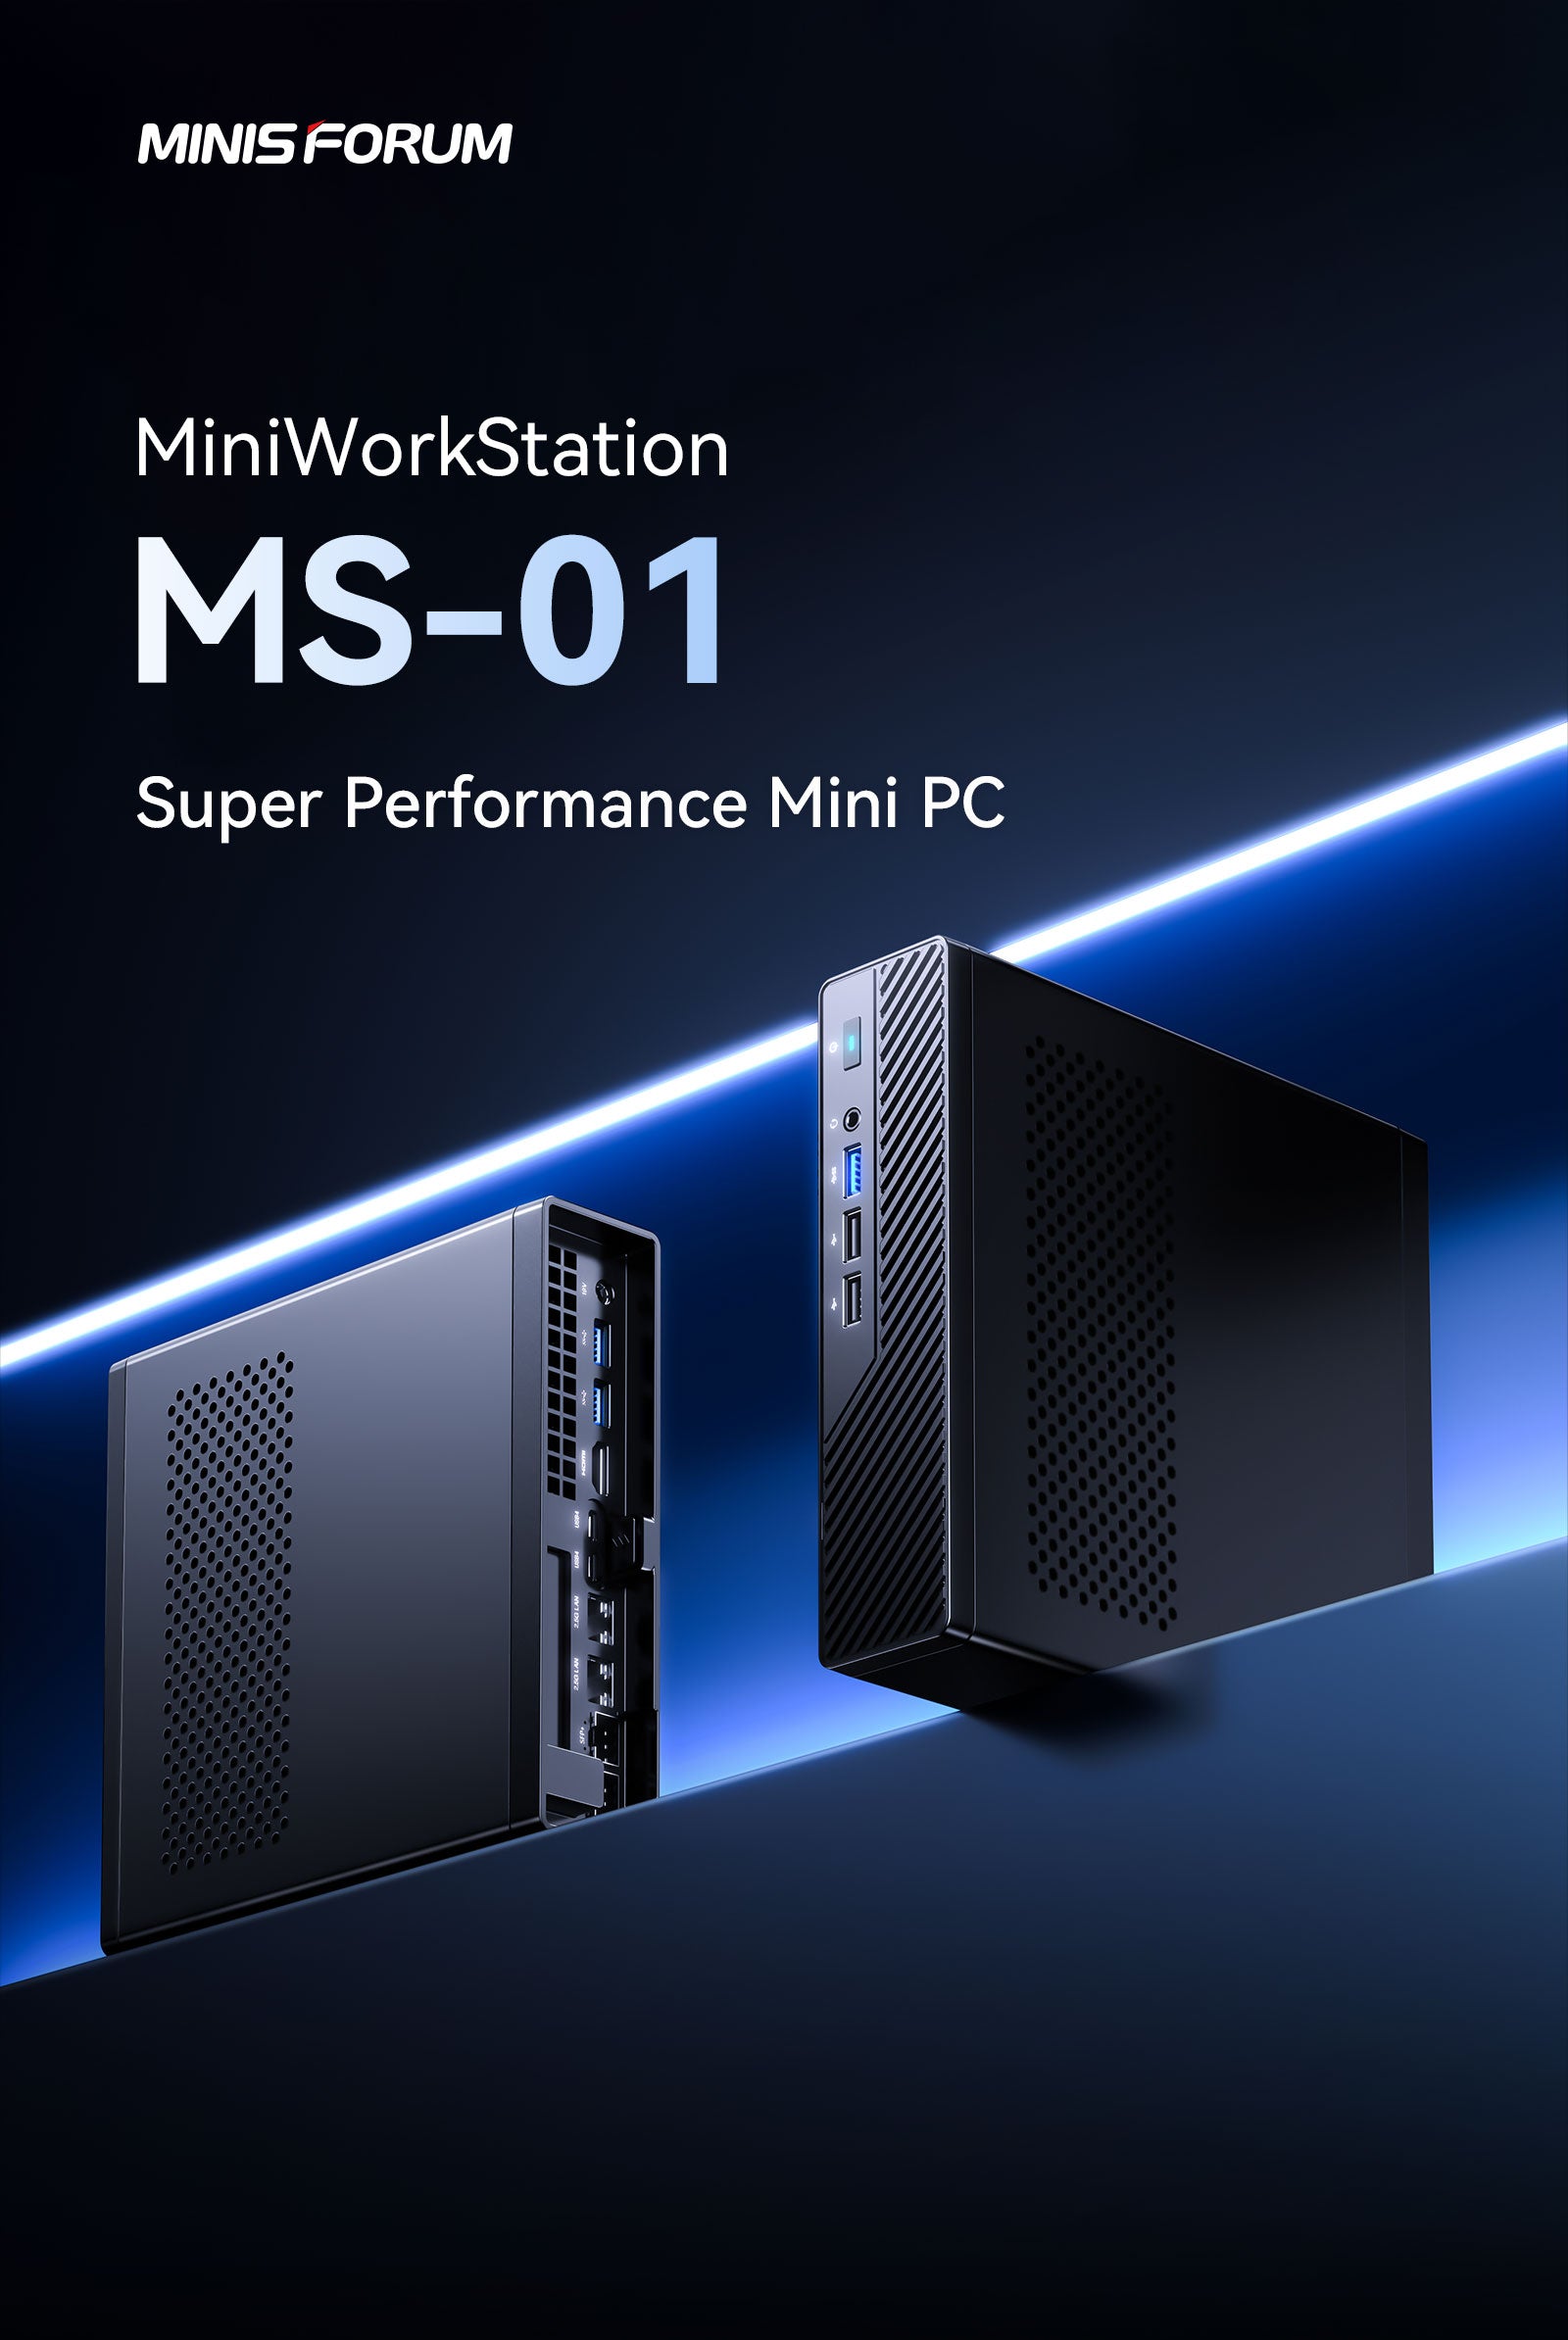 Minisforum UN100L review: The mini PC for office tasks with an